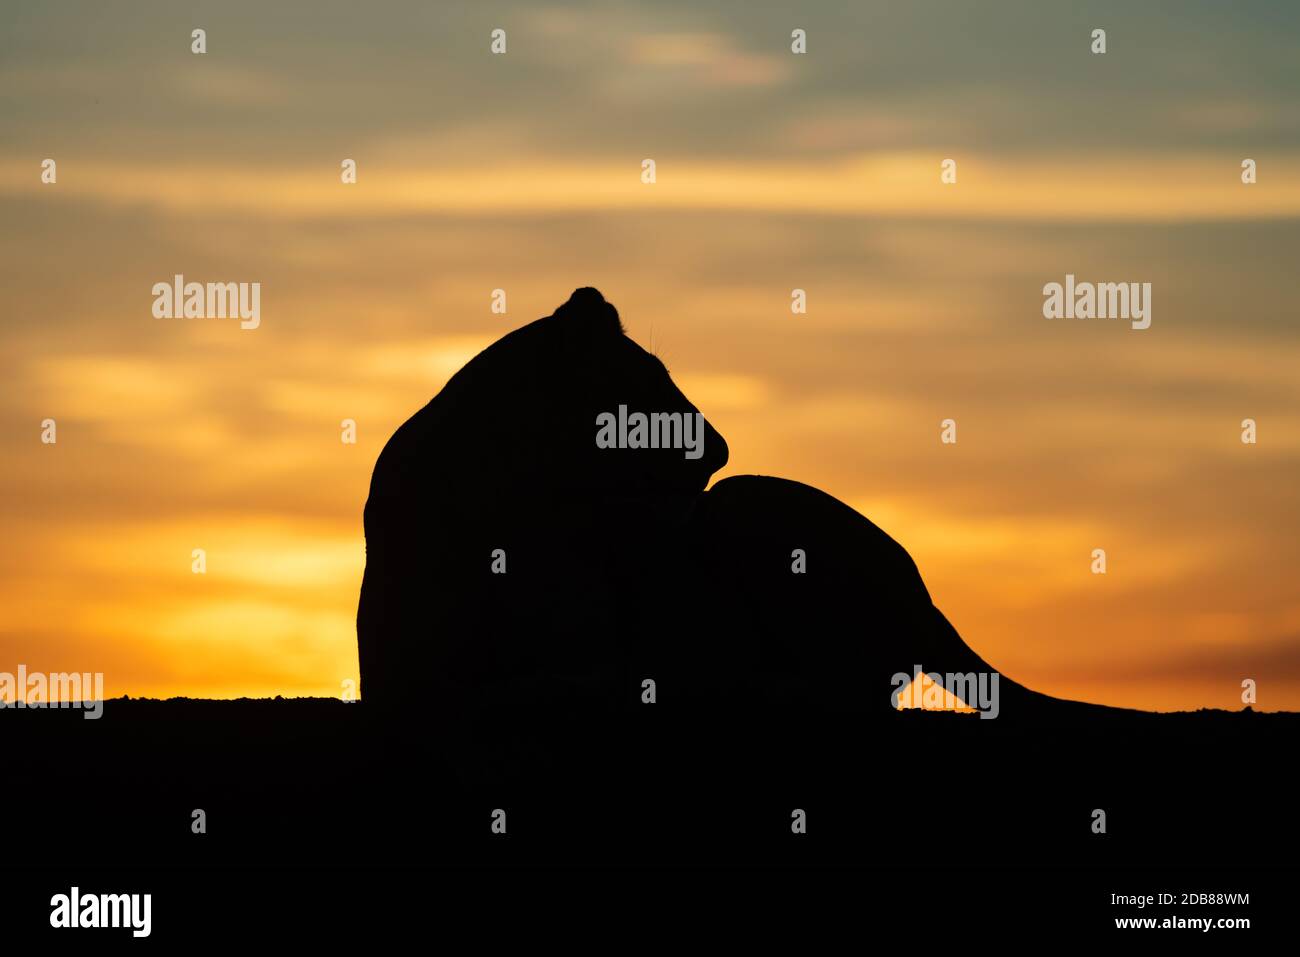 Silhouette of lioness turning head at dawn Stock Photo